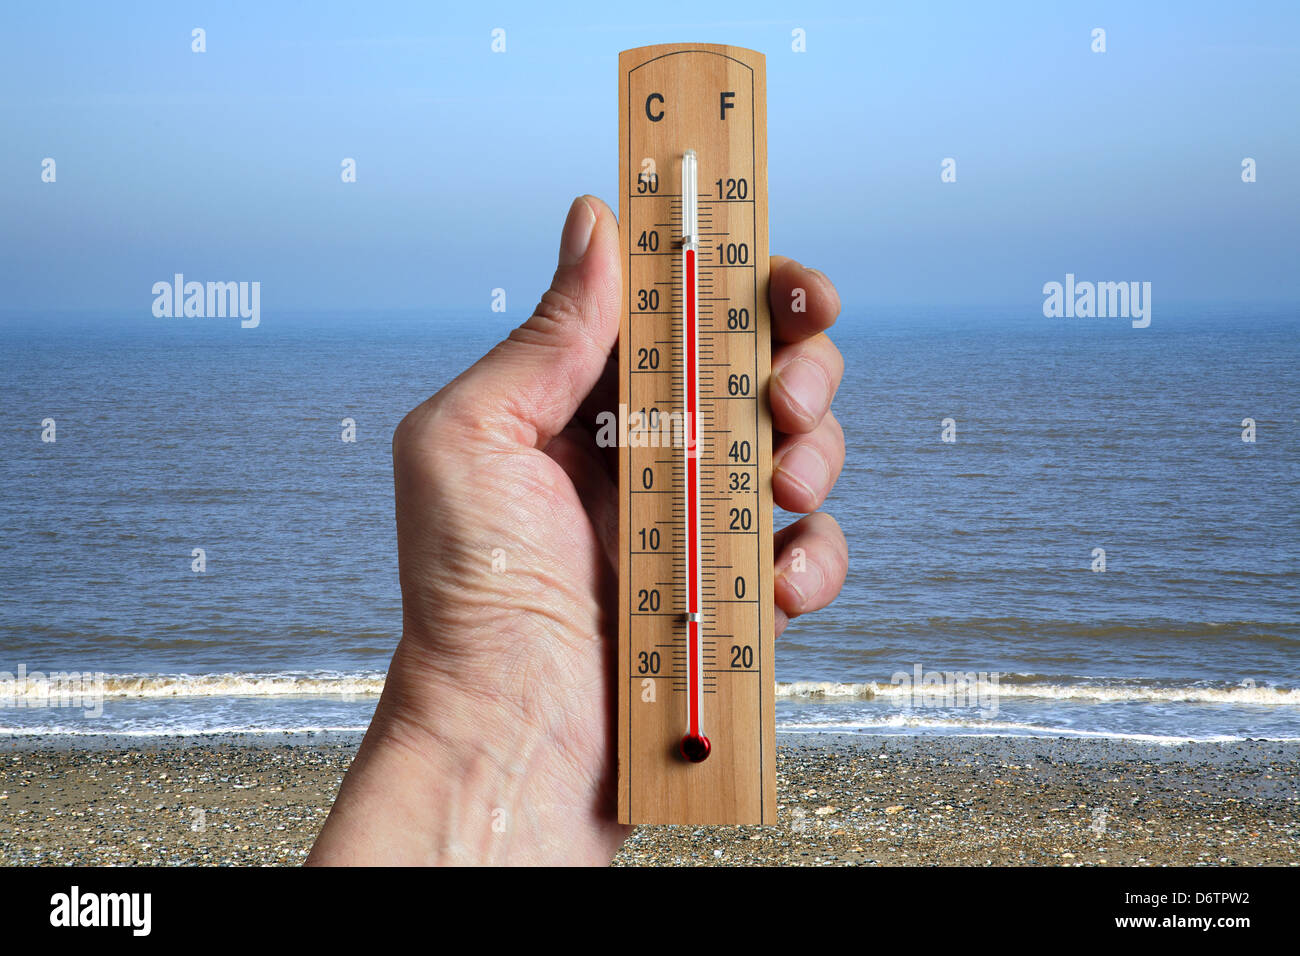 Hand holding a thermometer indicating climate change due to increasing global temperatures. Stock Photo